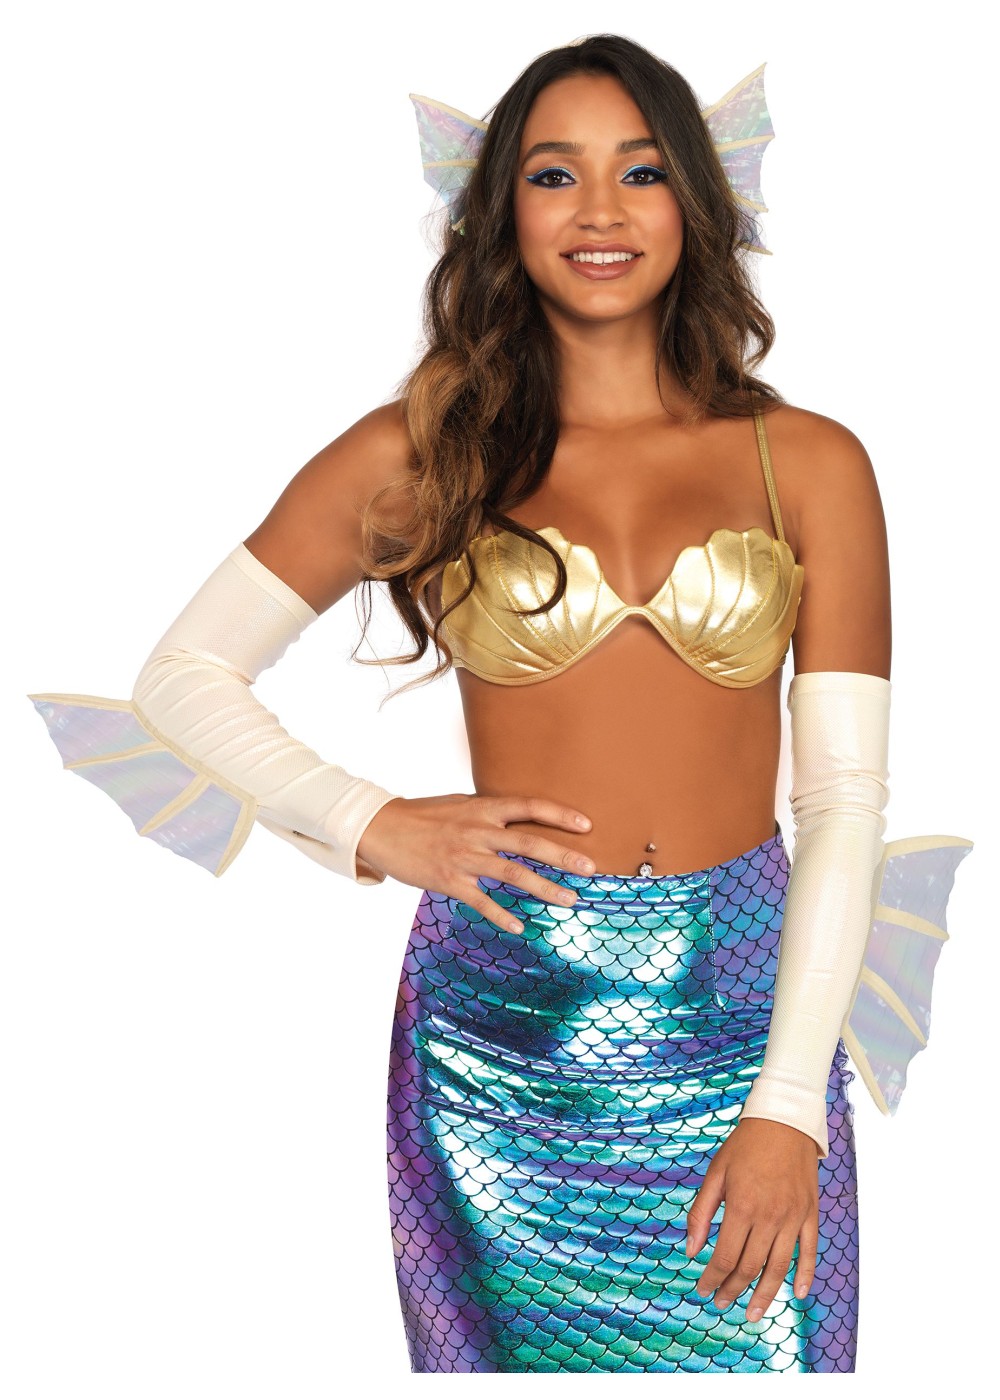 Mermaid Fin Ears And Arm Warmers Women Costume Accessory Kit